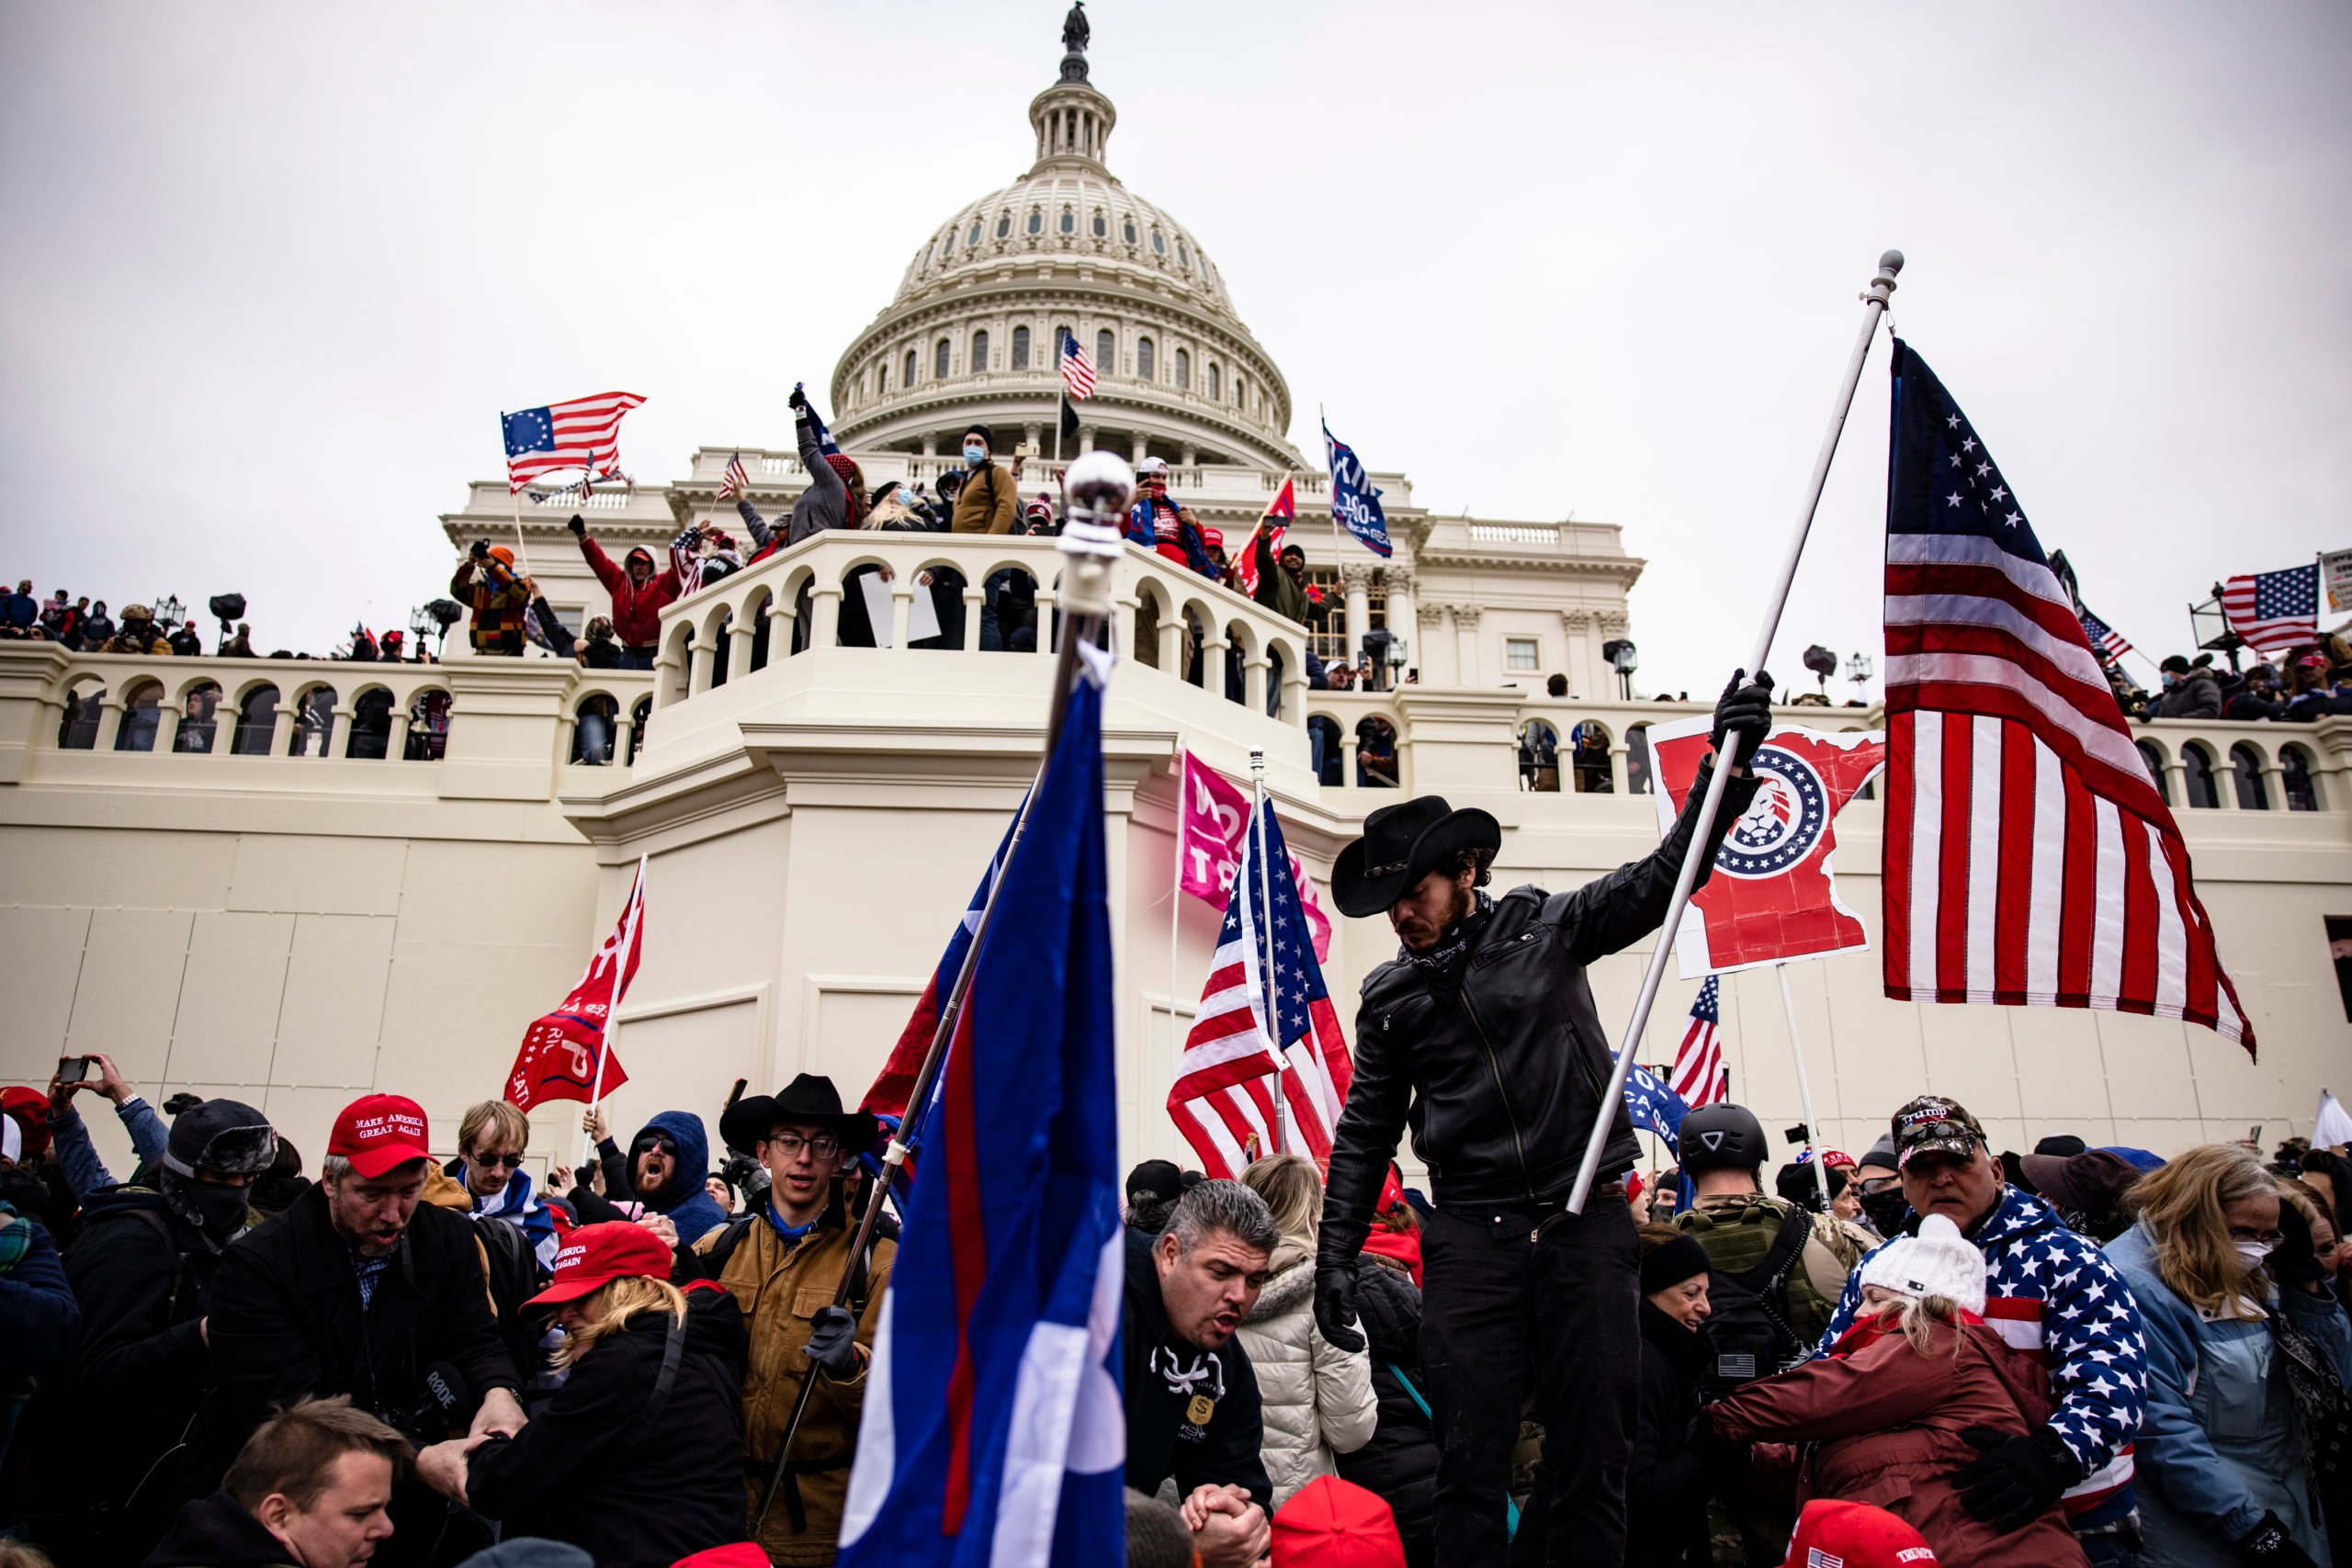 Pro-Trump supporters storm the U.S. Capitol following a rally with President Donald Trump on January 6, 2021 in Washington, DC. Trump supporters gathered in the nation's capital today to protest the ratification of President-elect Joe Biden's Electoral College victory over President Trump in the 2020 election. (Photo by Samuel Corum/Getty Images)